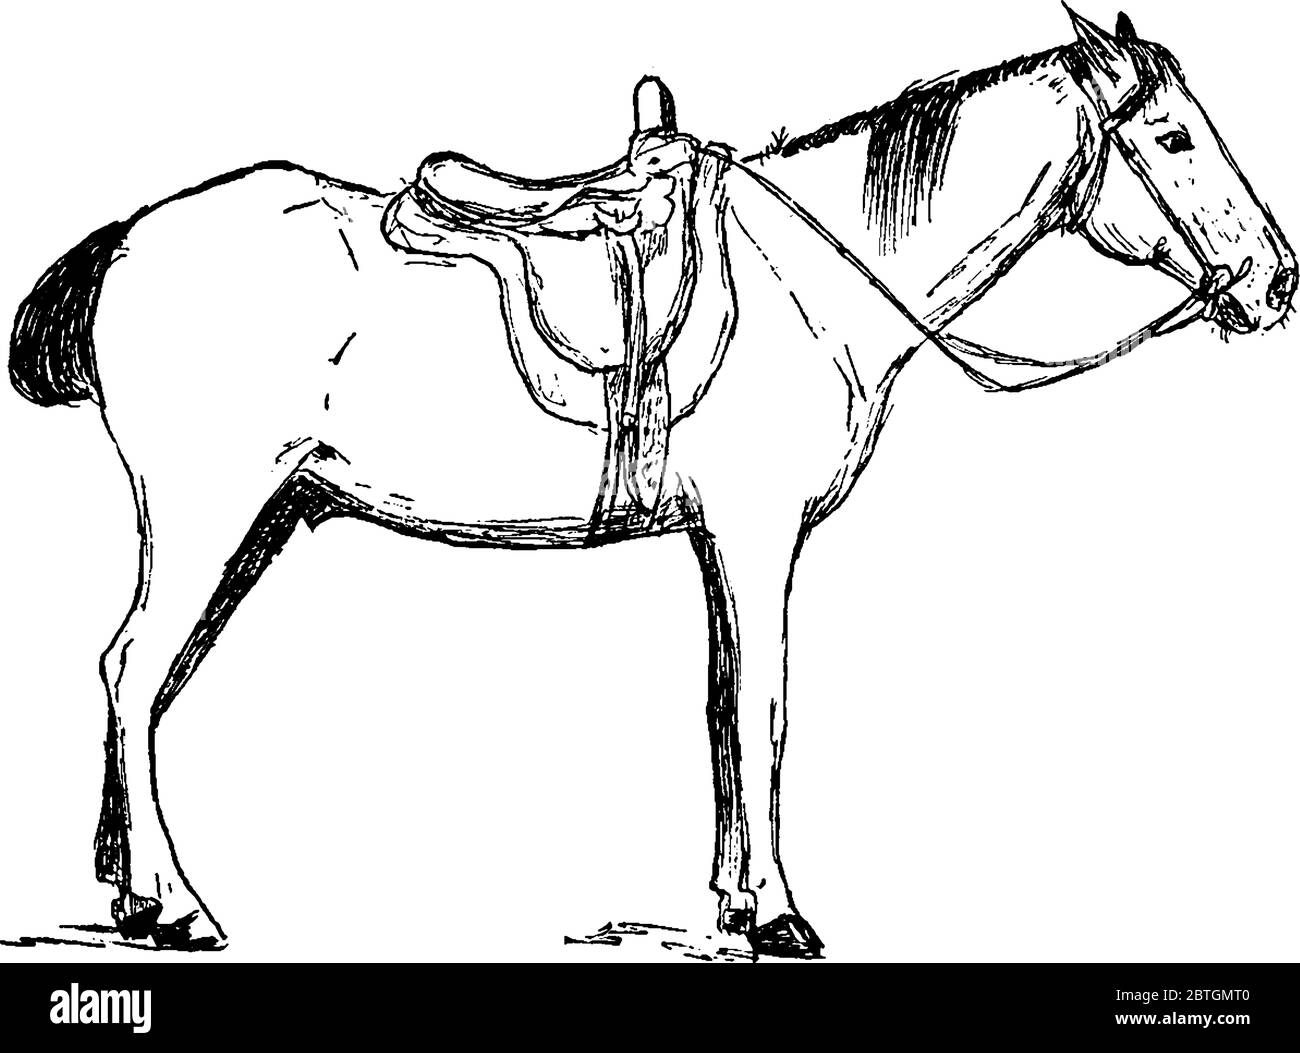 A domestic horse used for riding and transport. The horse Equus ferus caballus is one of two extant subspecies of Equus ferus. It is an odd-toed ungul Stock Vector